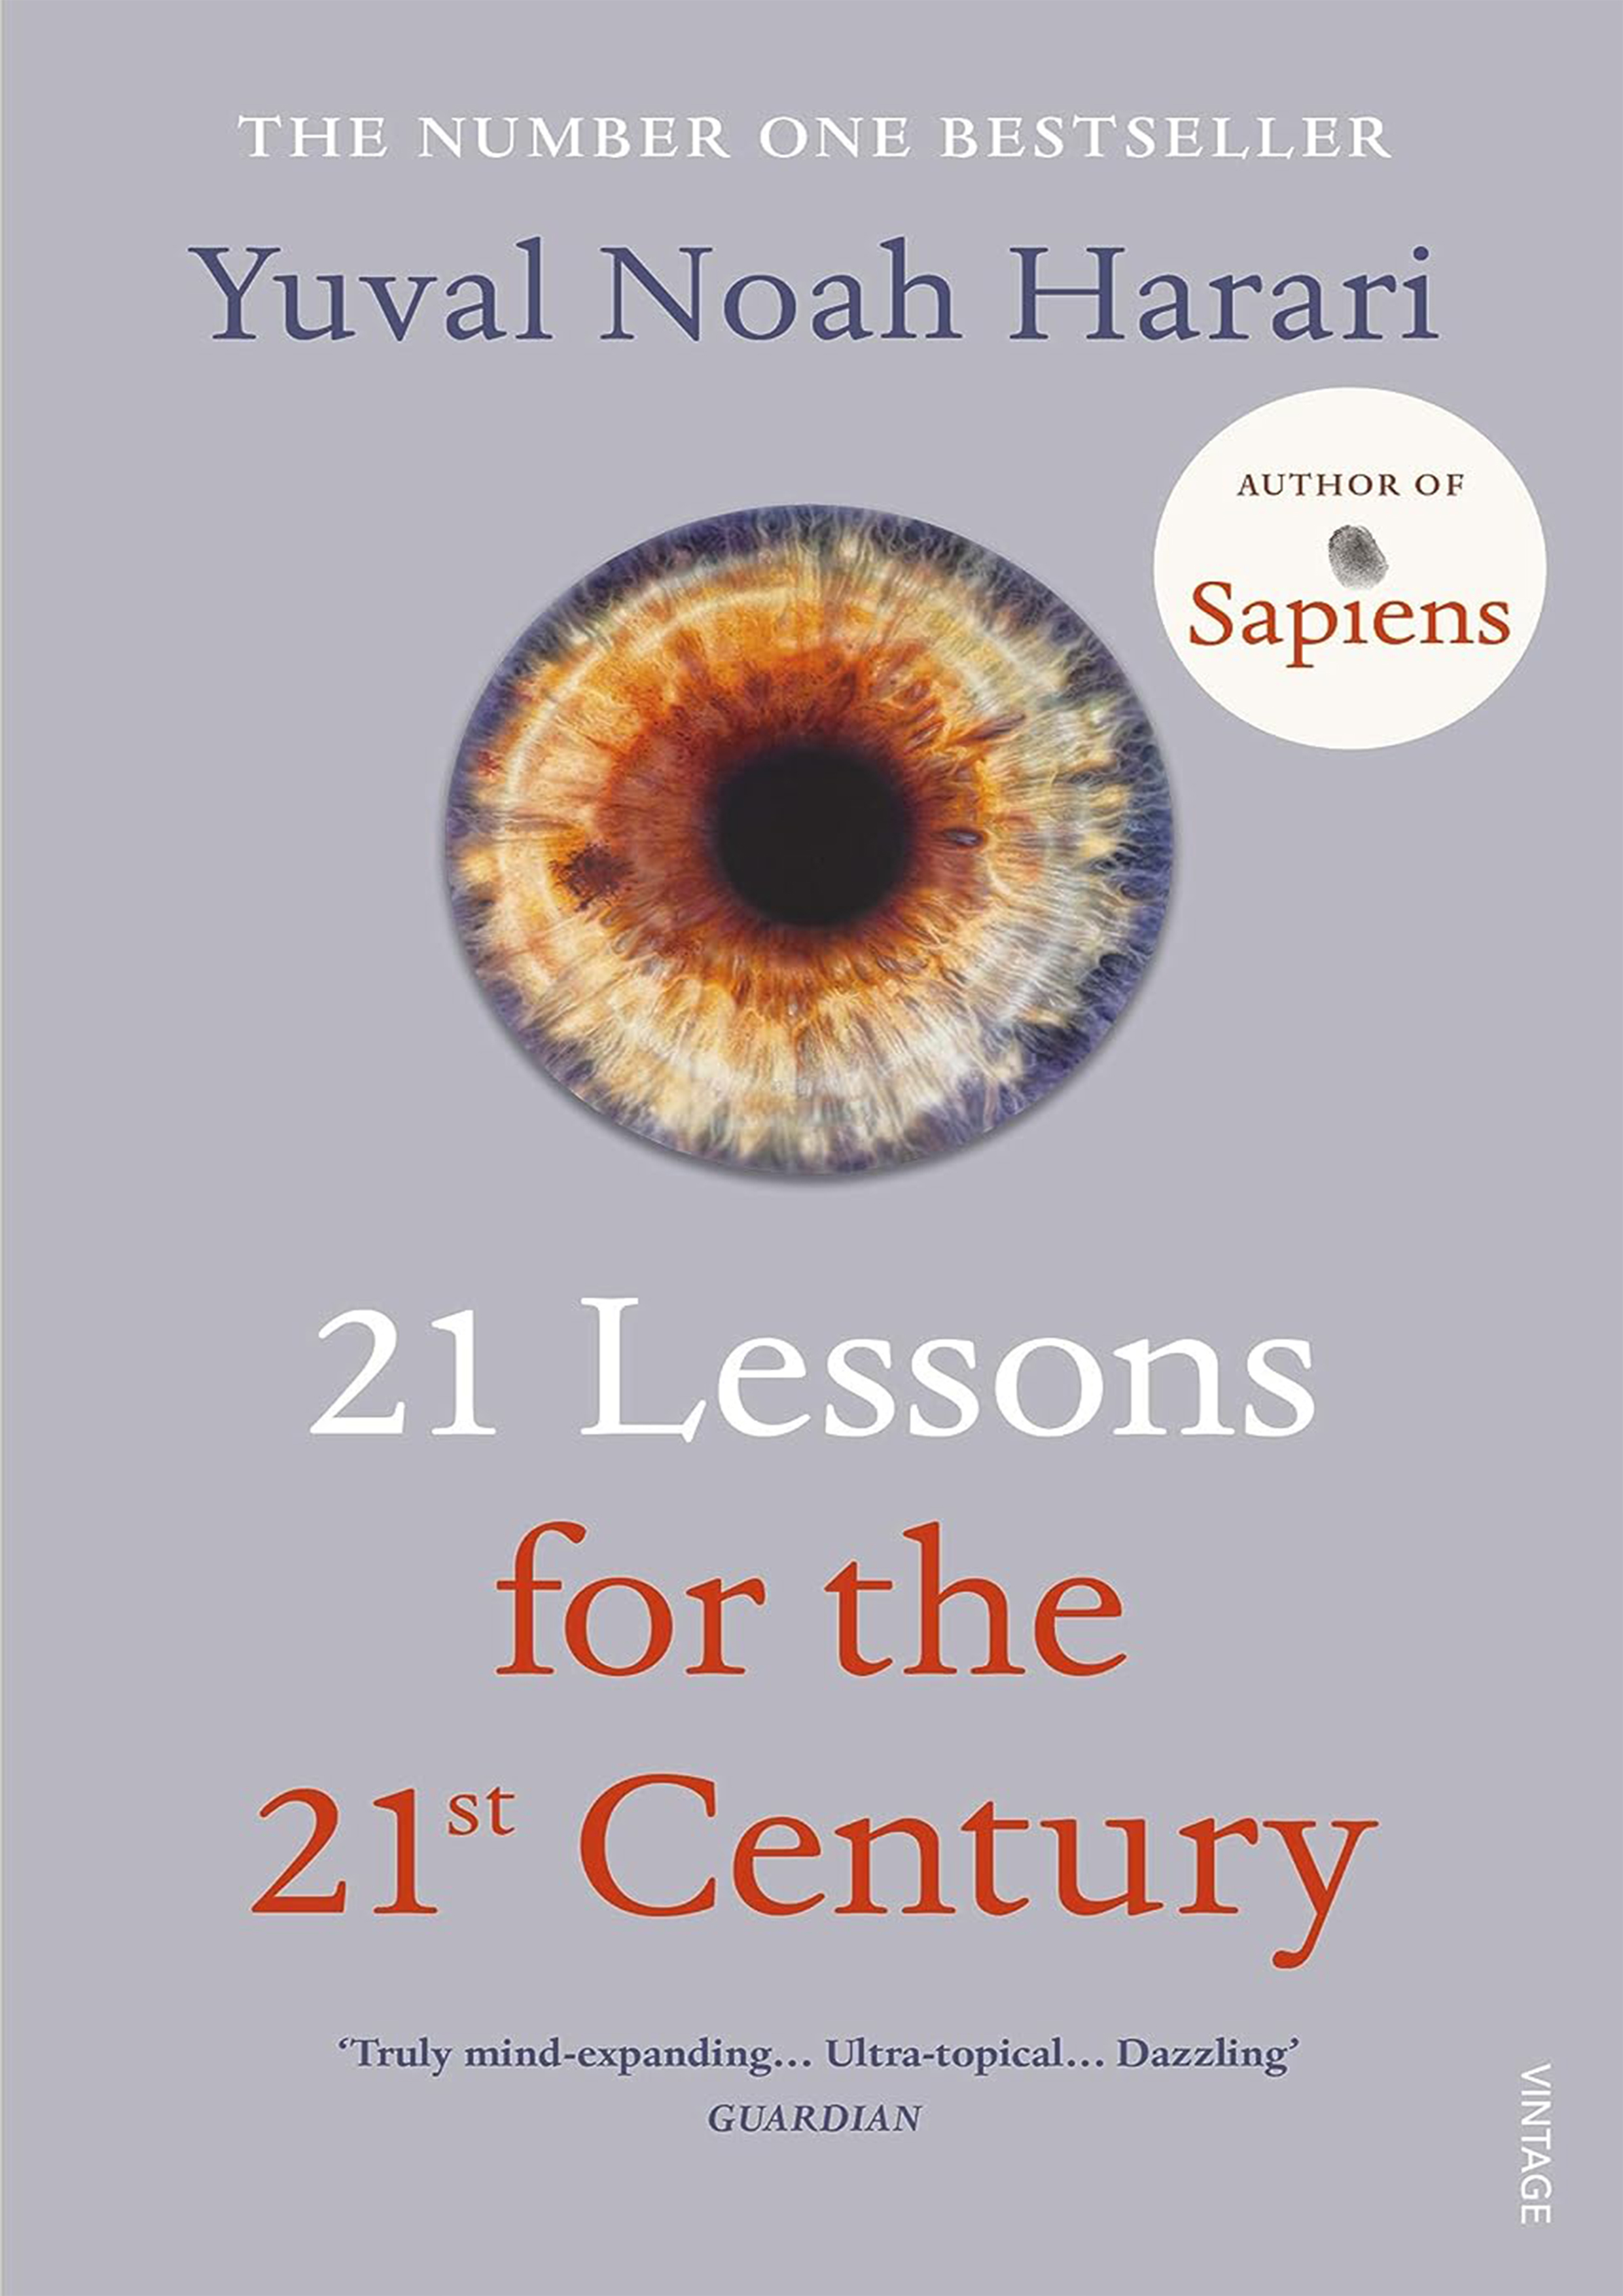 21 Lessons for the 21st Century (পেপারব্যাক)